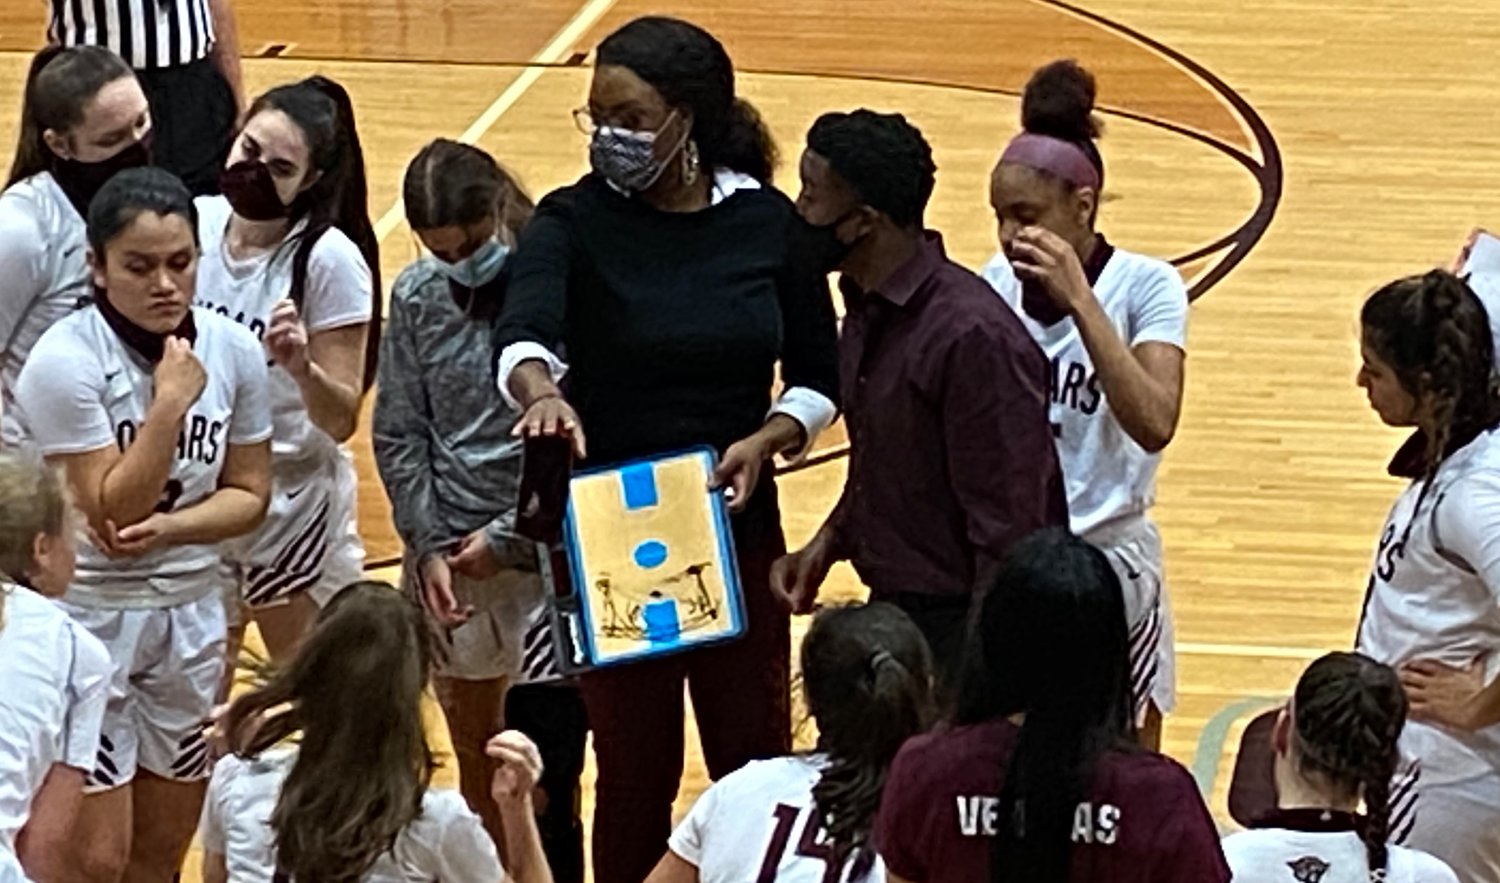 Tamara Collier, in her first year at the helm of Cinco Ranch, talks to her players during a timeout during a game against Morton Ranch on Jan. 6 at Cinco Ranch High.